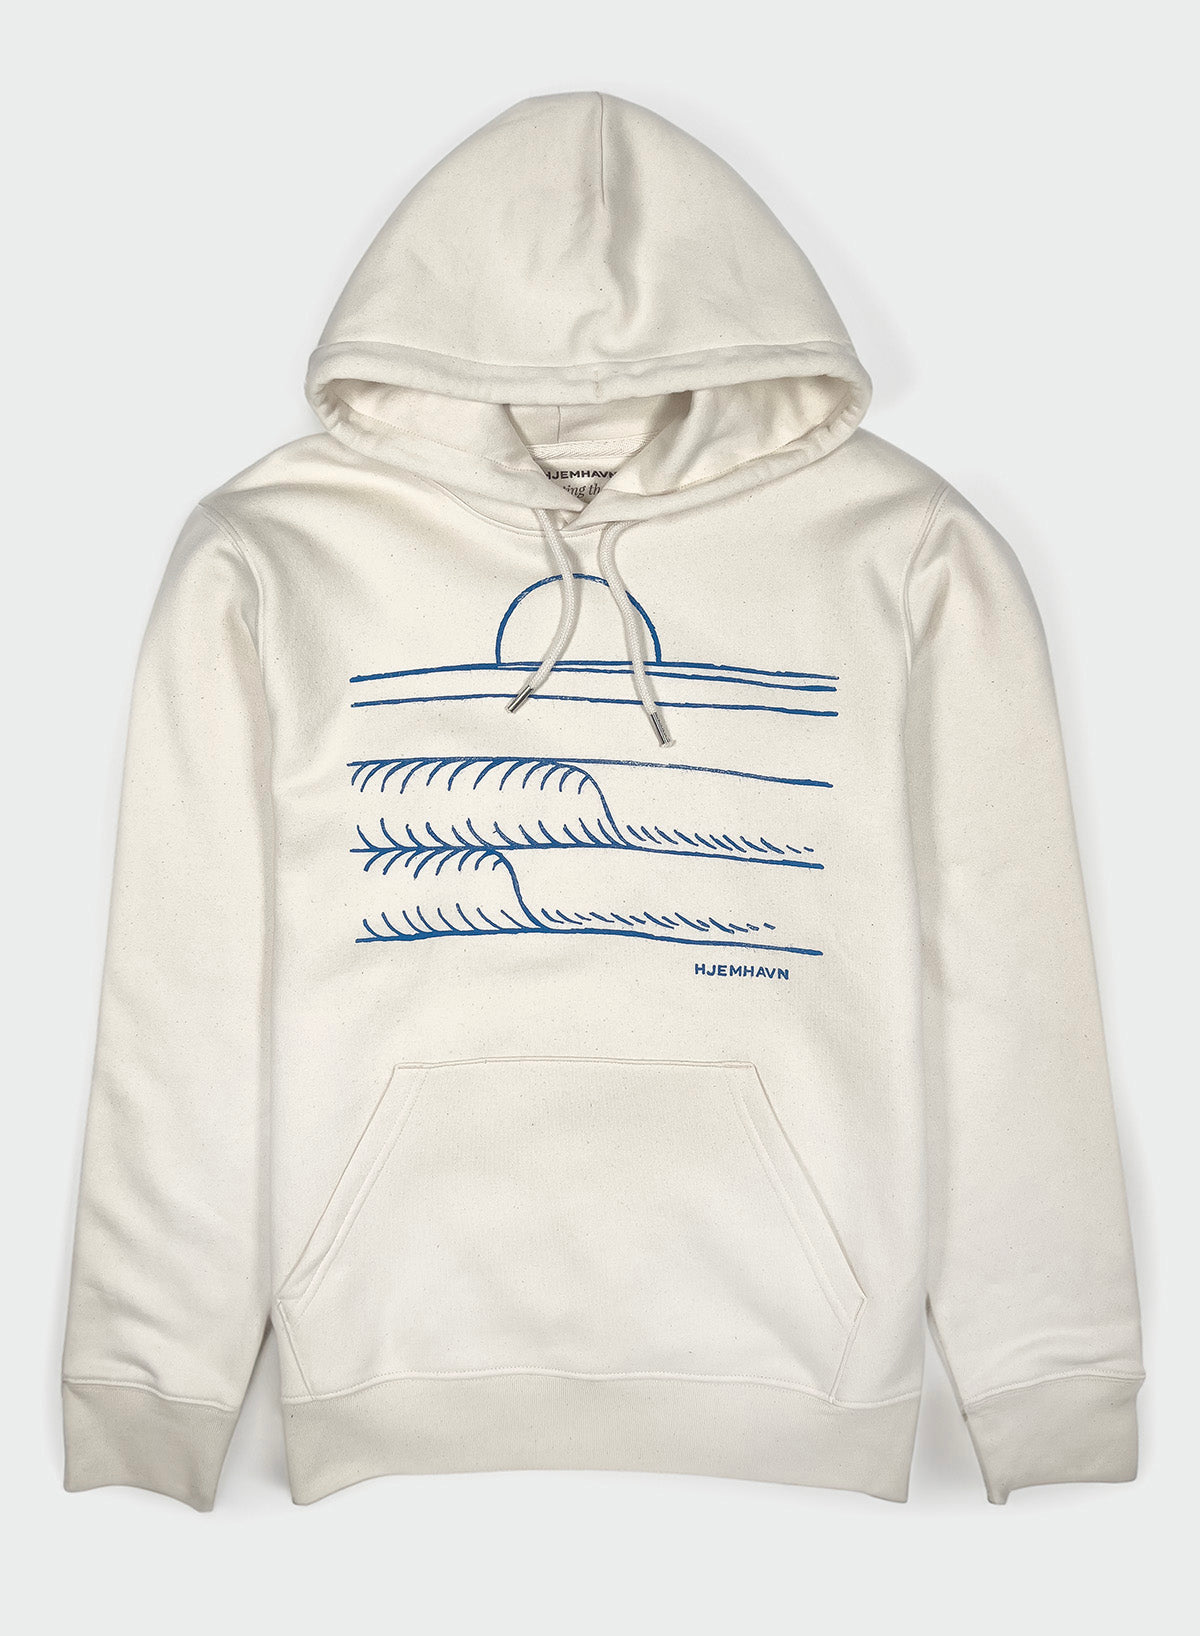 Hoodie "The View"